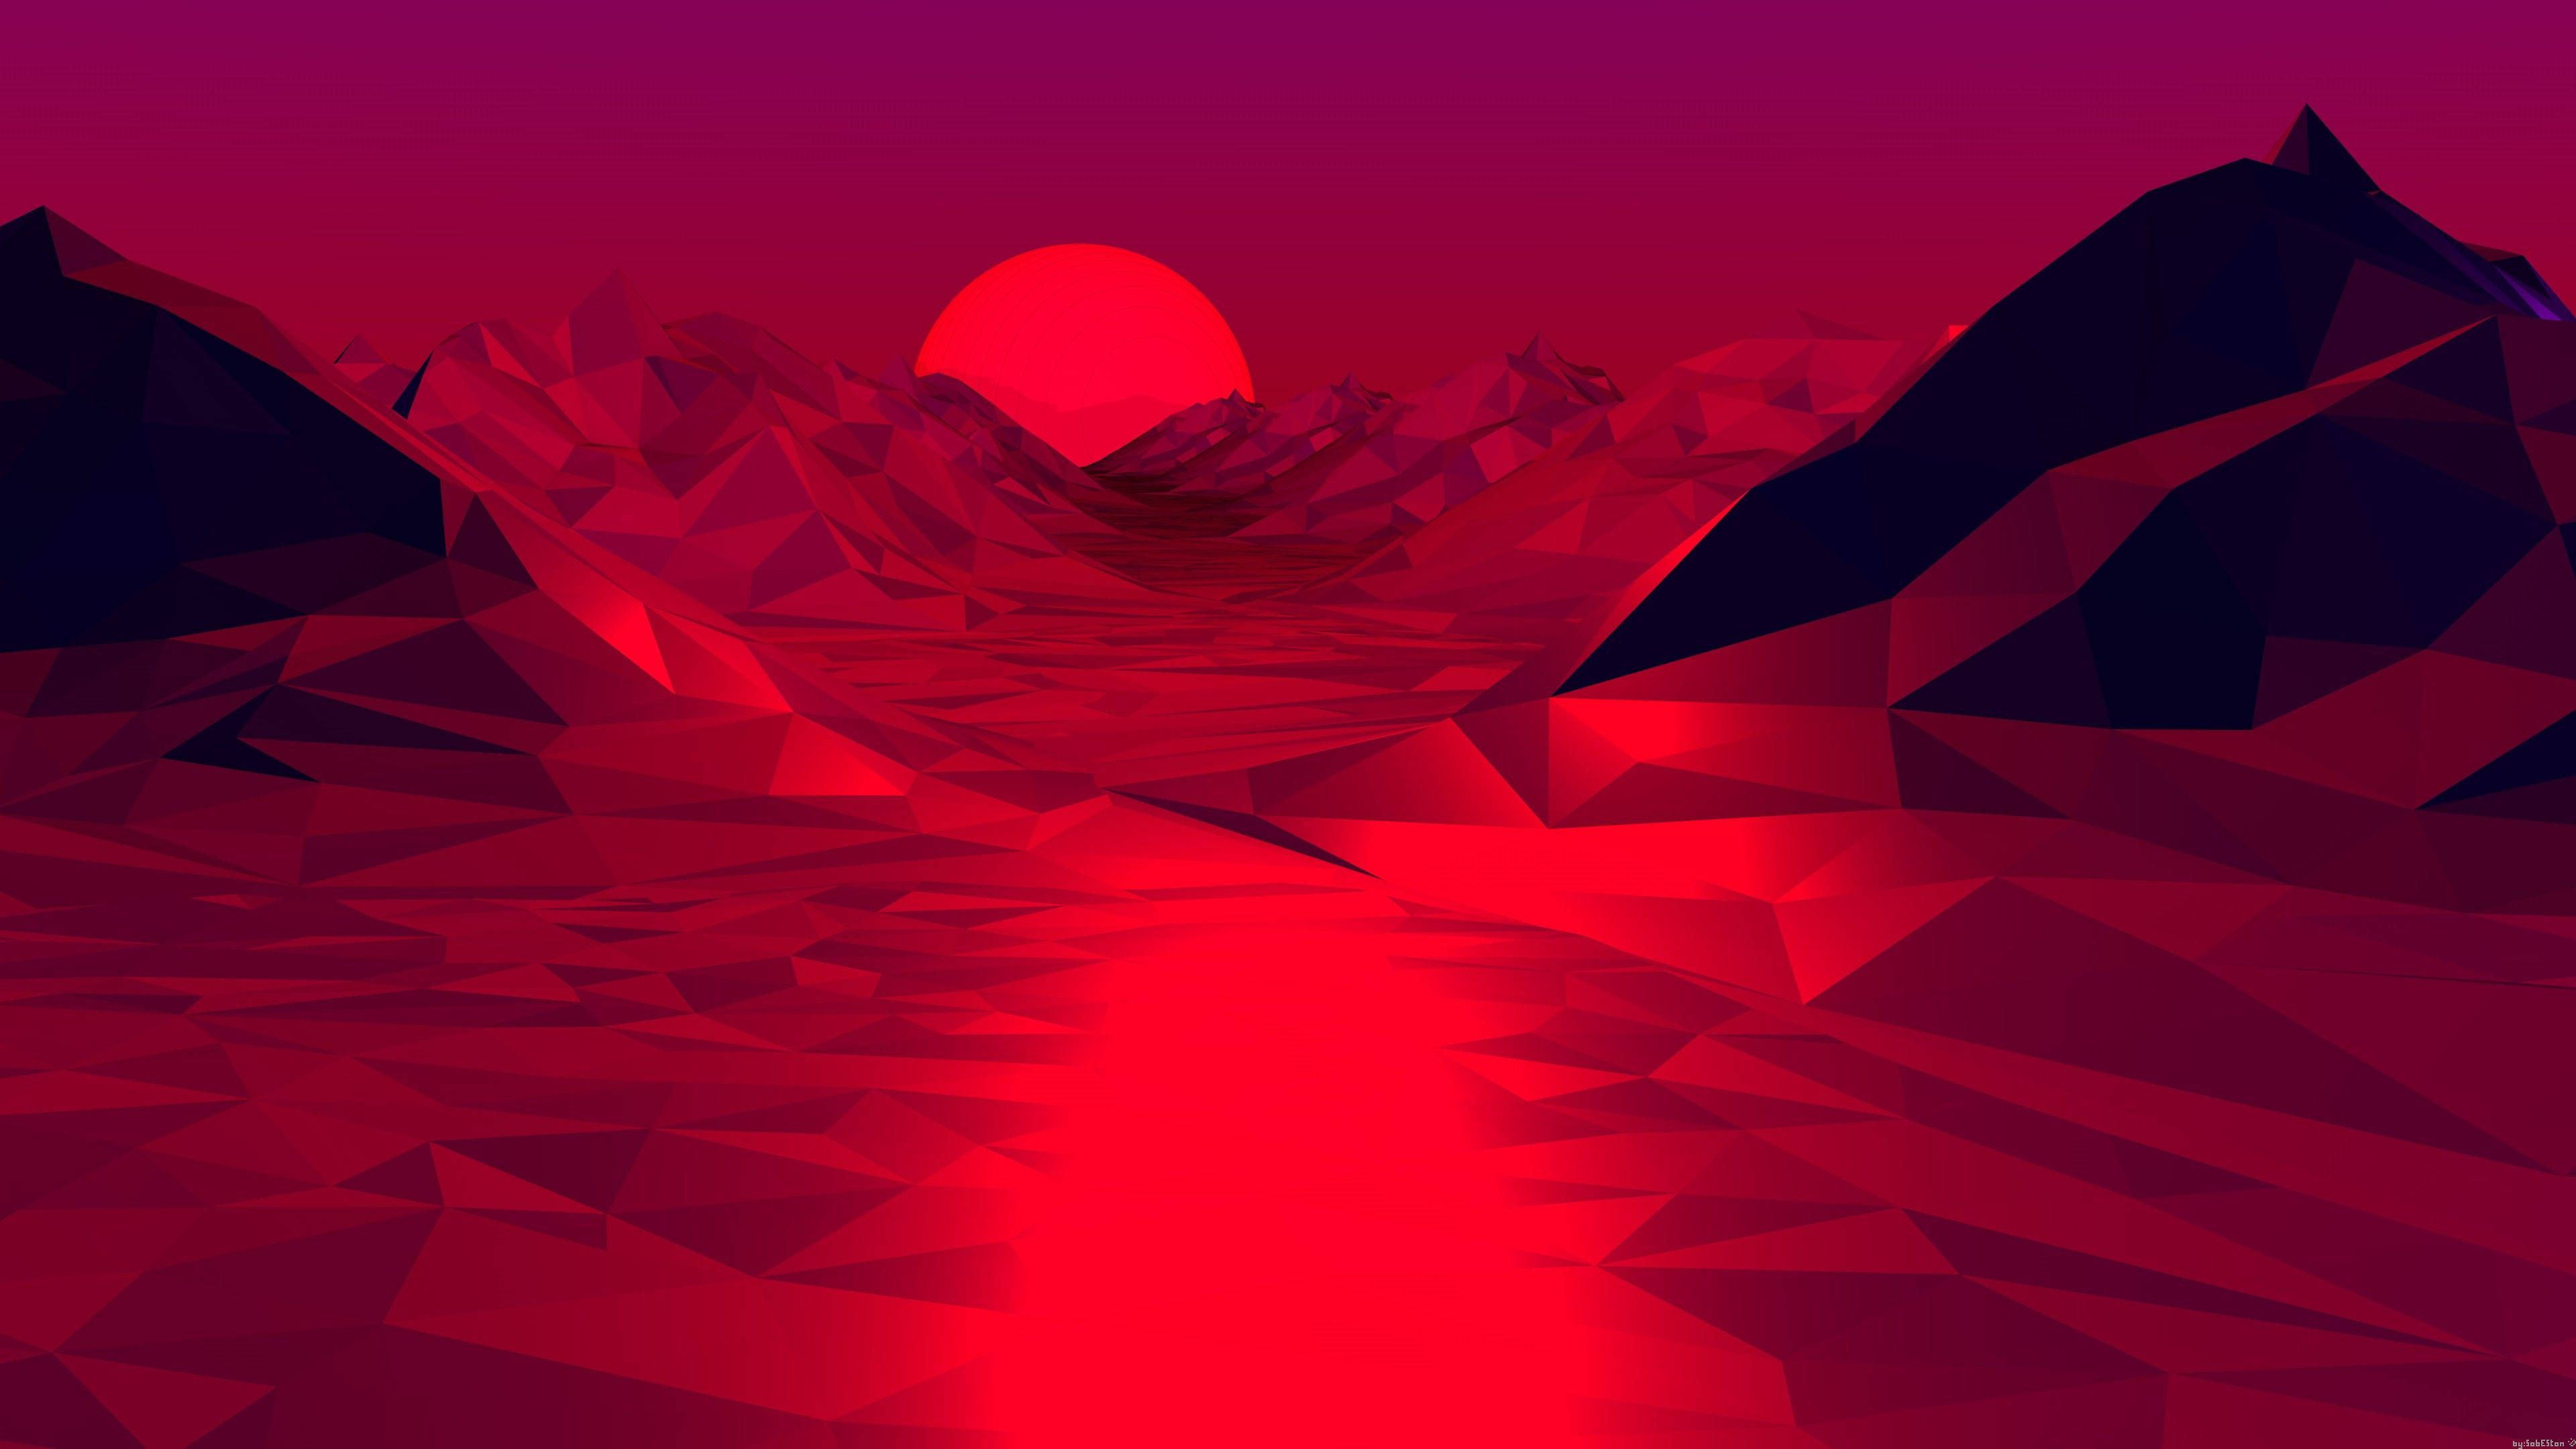 Red sunset in the mountains wallpaper 2560x1440 - Vaporwave